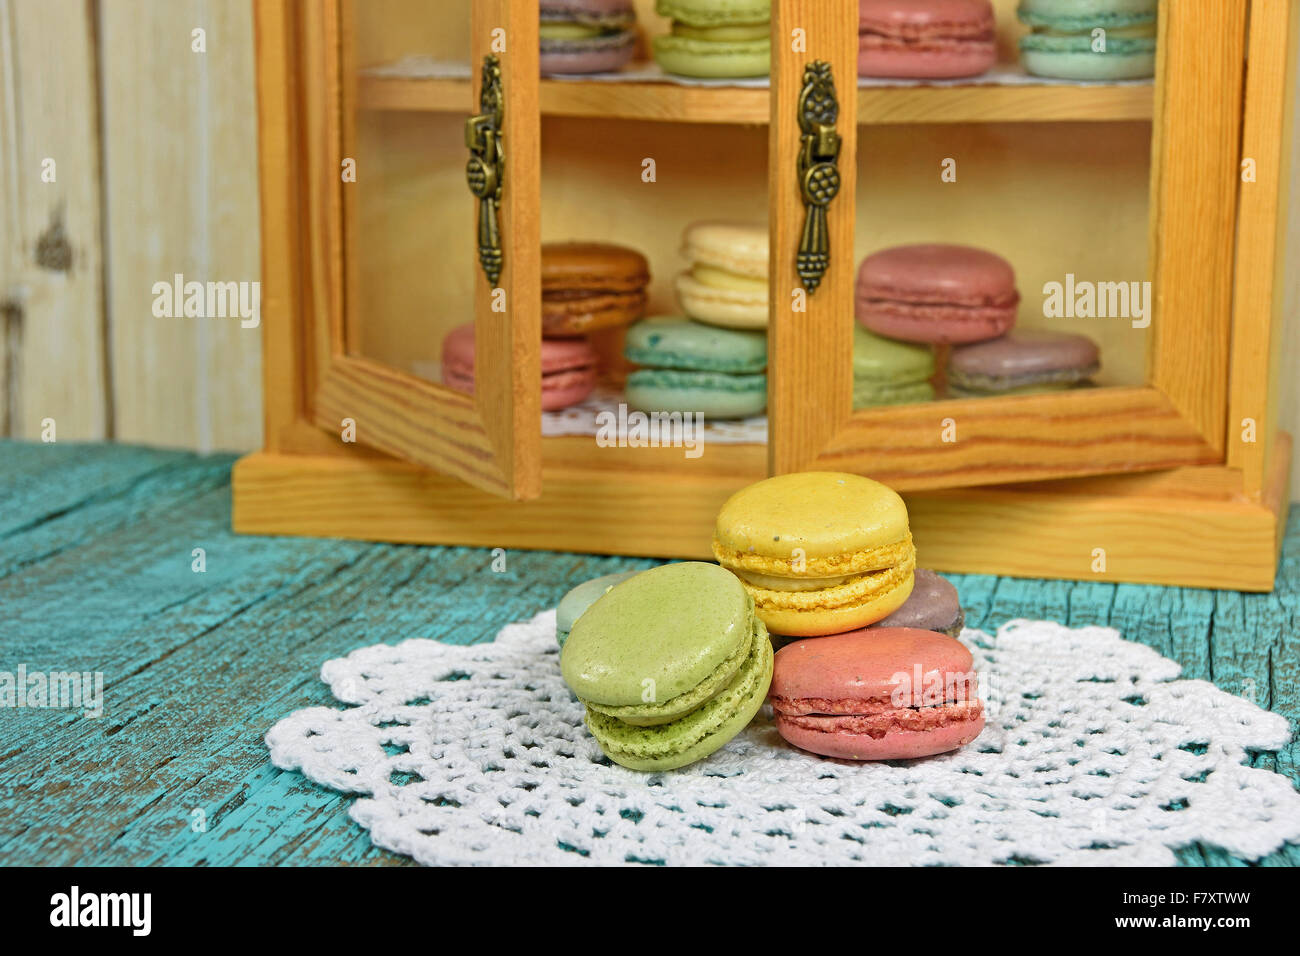 French macaroons on white lace doily with macaroons in cupboard. Stock Photo